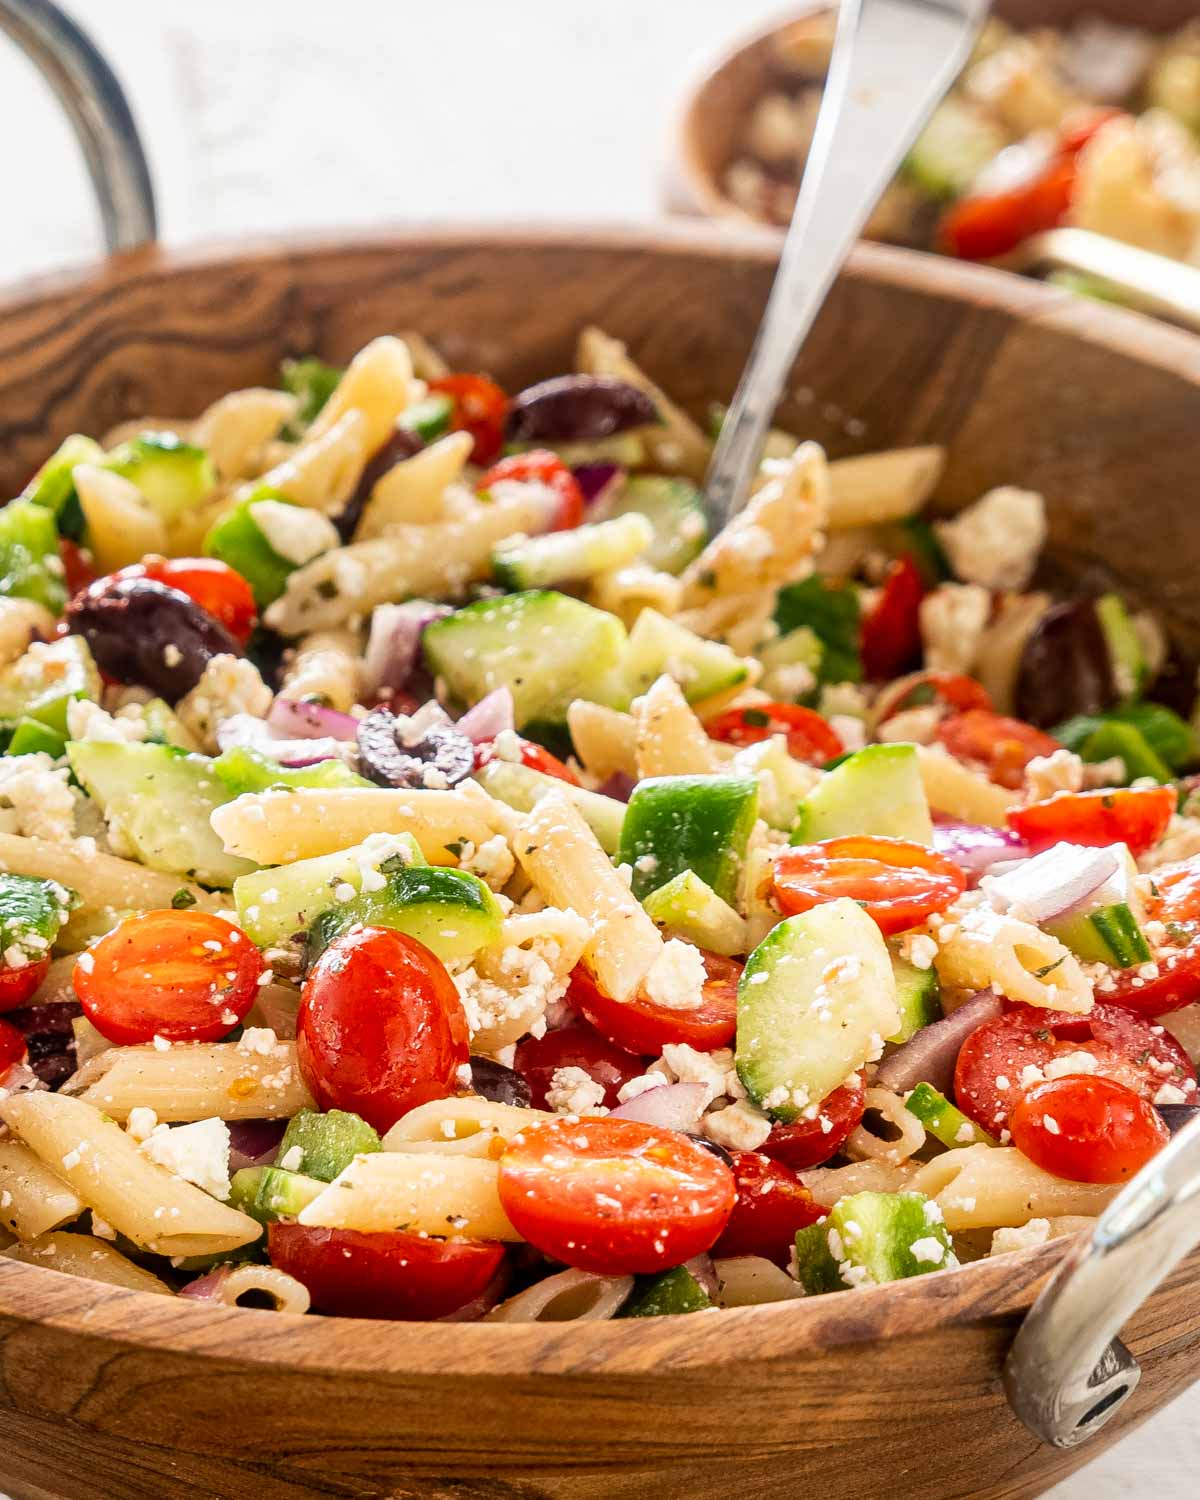 freshly made greek pasta salad in a wooden bowl.